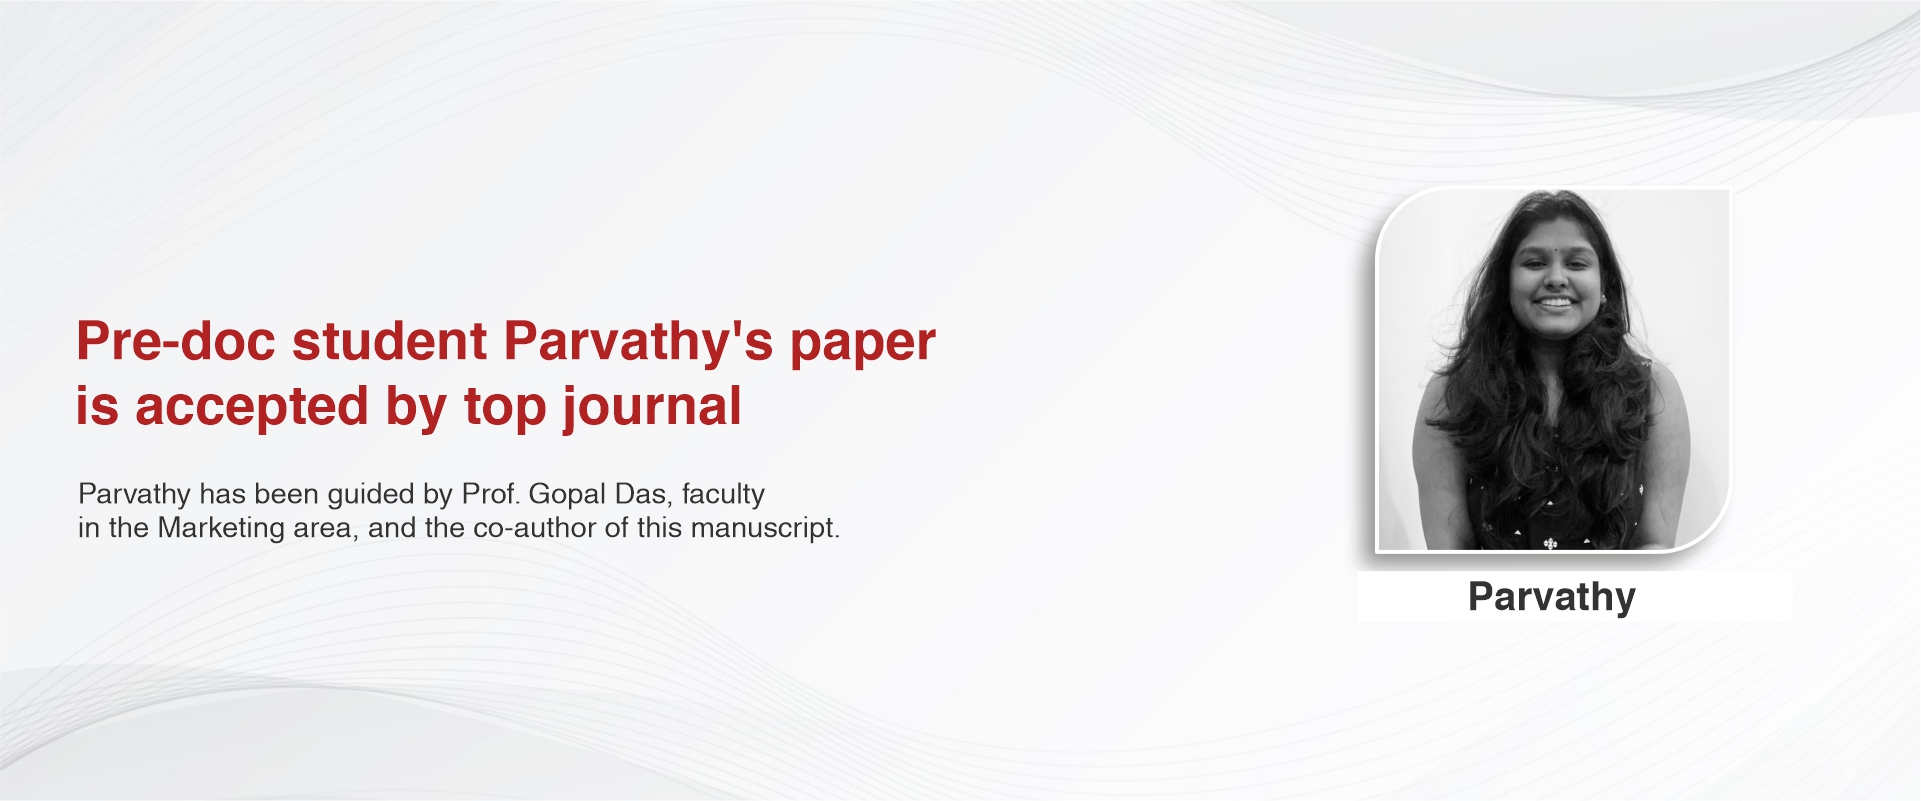 Pre-doc student Parvathy’s paper is accepted by top journal